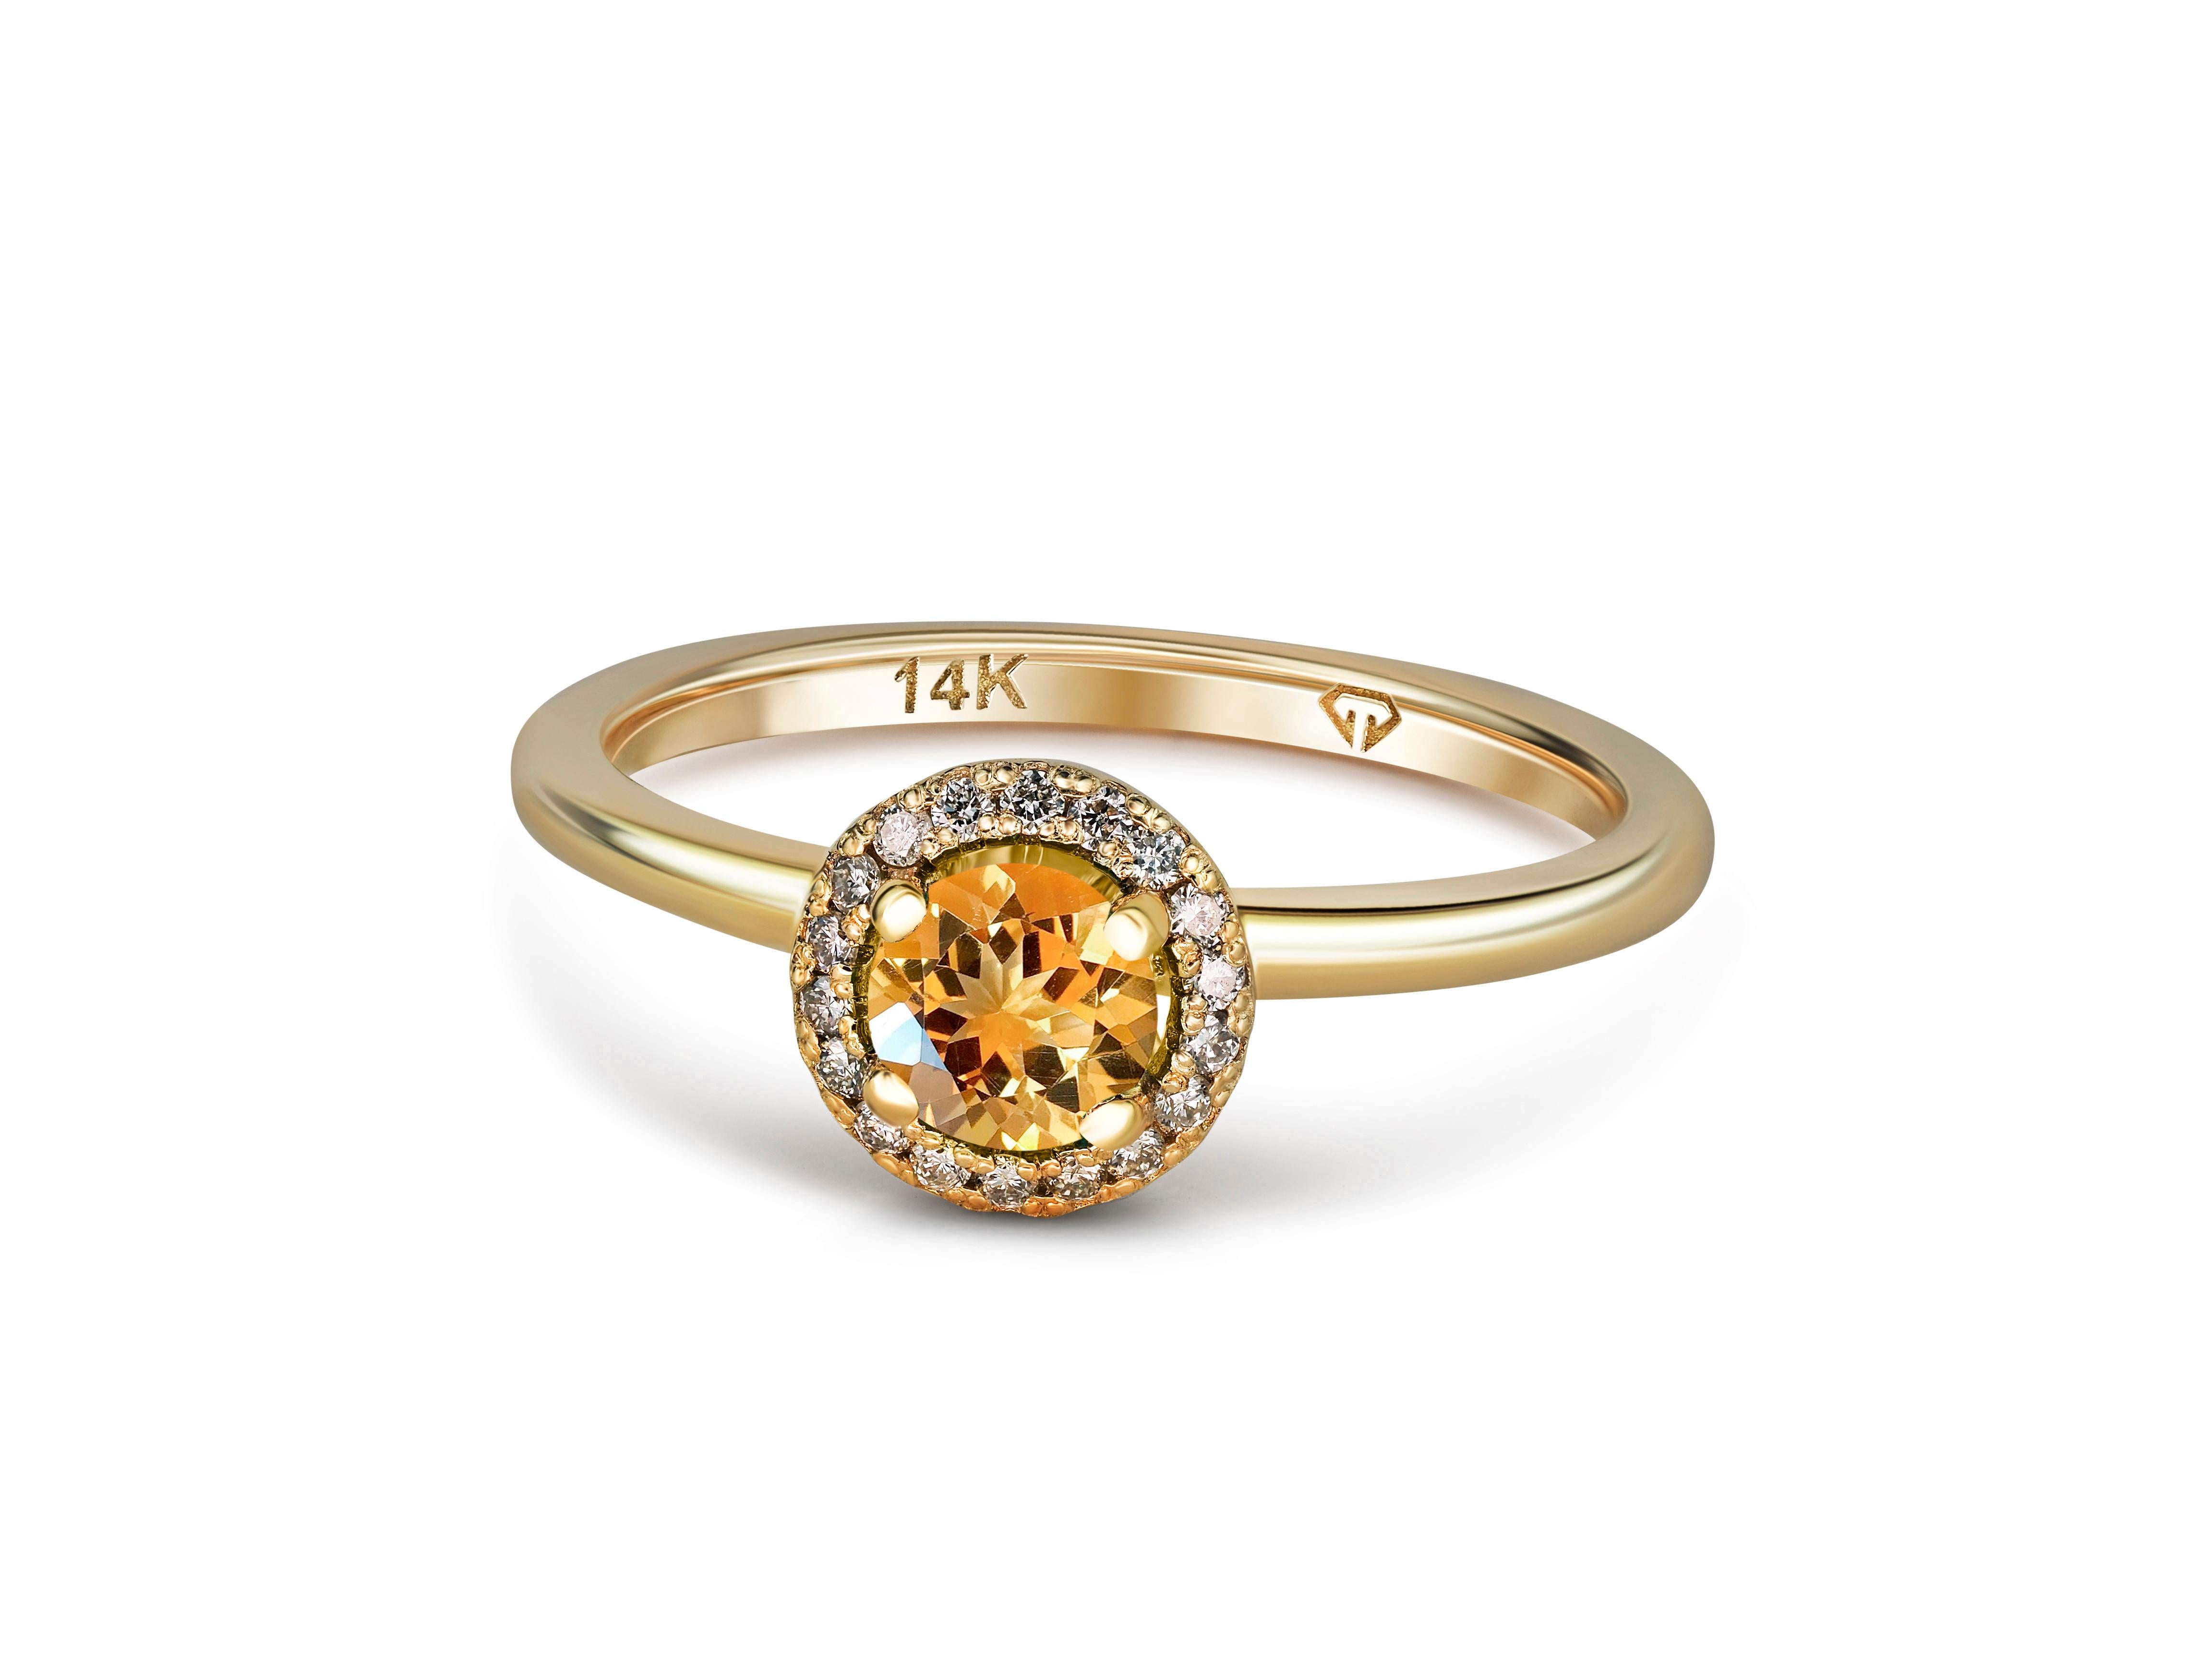 Halo Citrine Ring with Diamonds in 14 Karat Gold. 
Citrine gold ring. Citrine engagement ring. November birthstone citrine ring.

Metal type: Gold
Metal stamp: 14k Gold
Weight: 2 gr - depends from size.

Central gemstone:
Citrine round shape, yellow